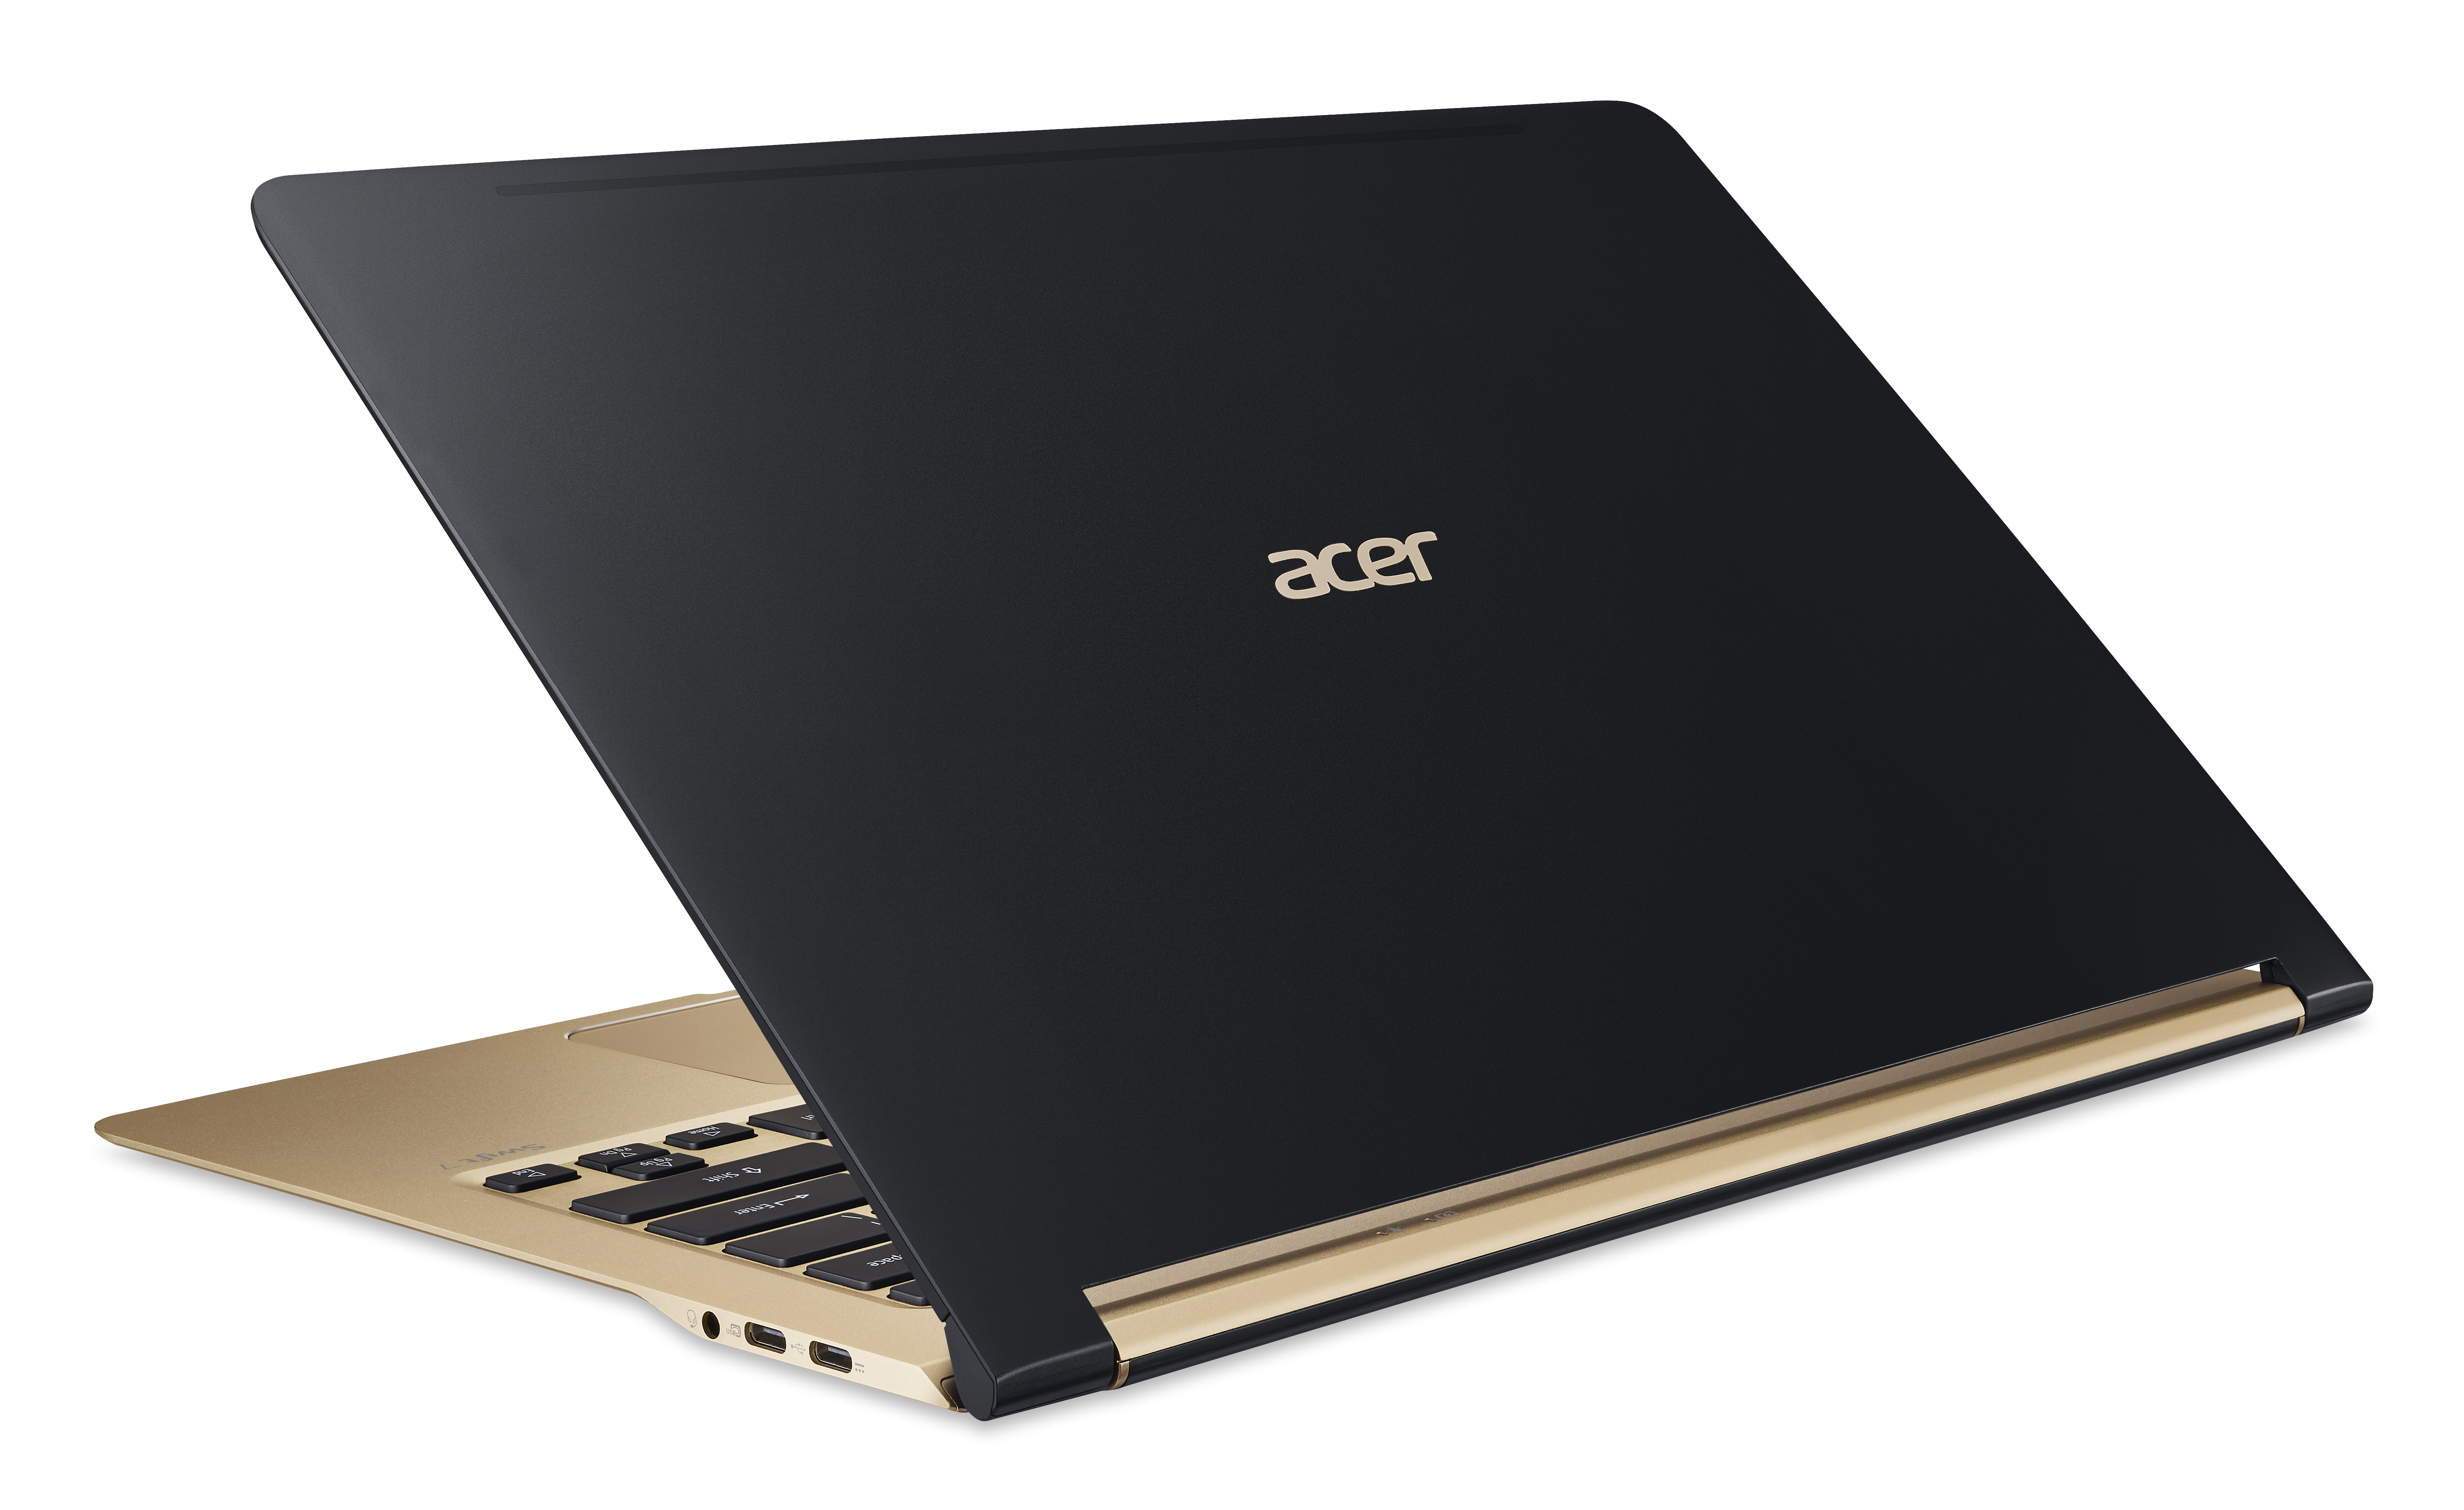 The Acer Swift 7 with Windows 10